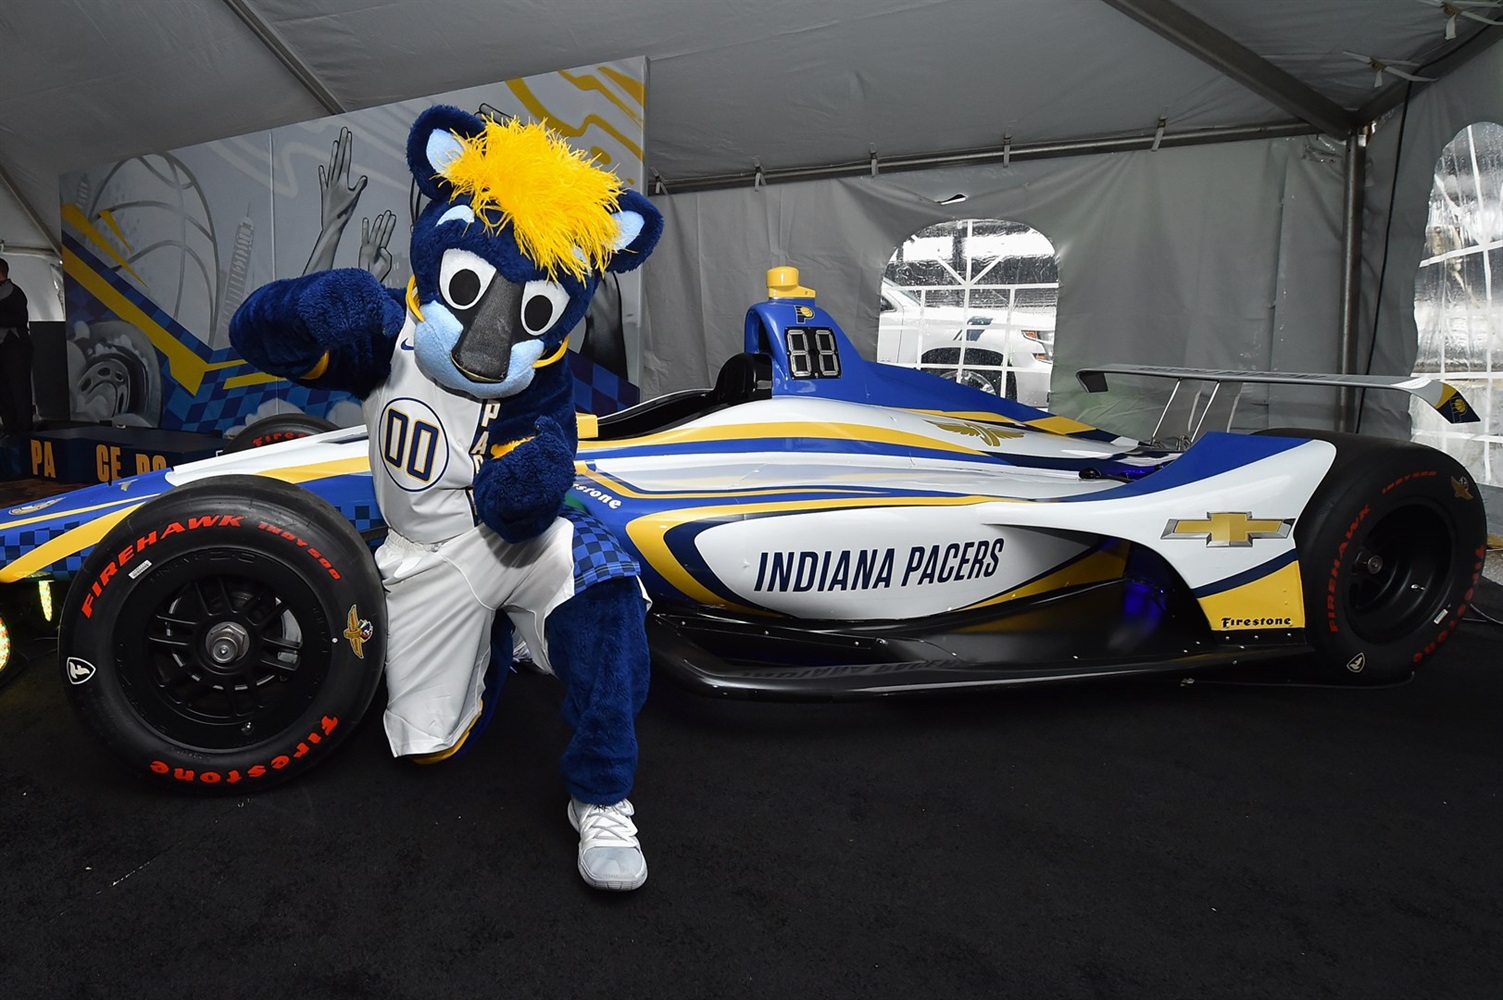 IndyCar and Pacers come together for unveiling of new Pacers' jersey.